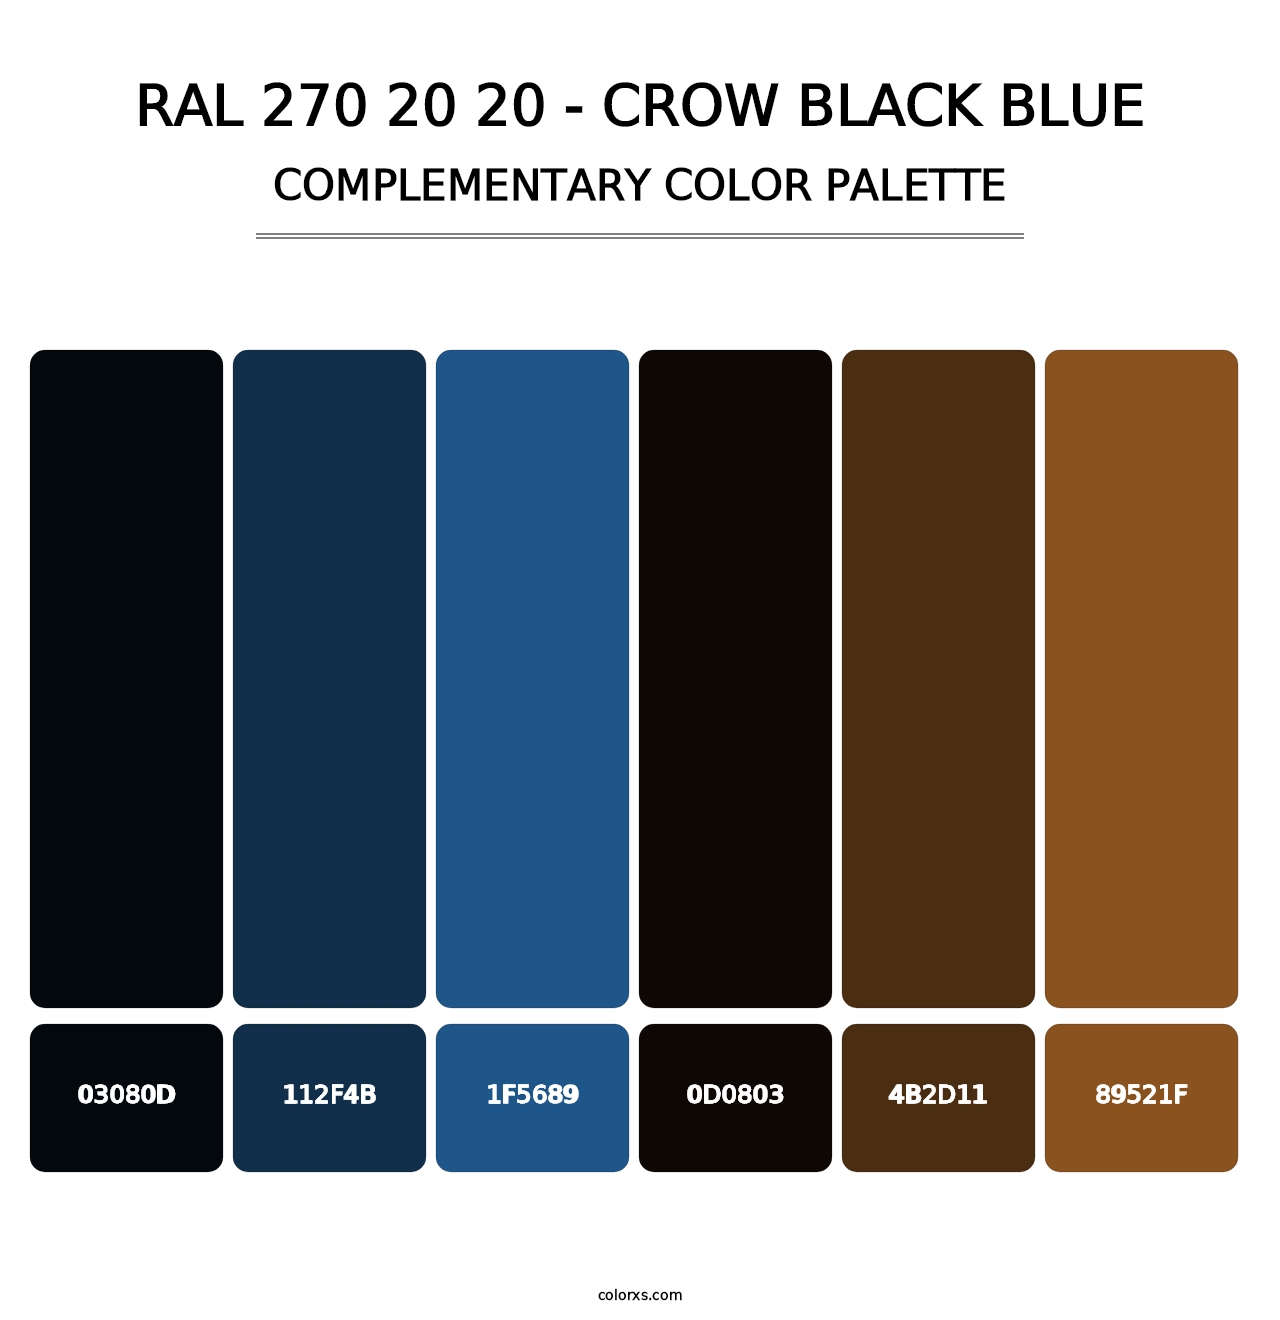 RAL 270 20 20 - Crow Black Blue - Complementary Color Palette